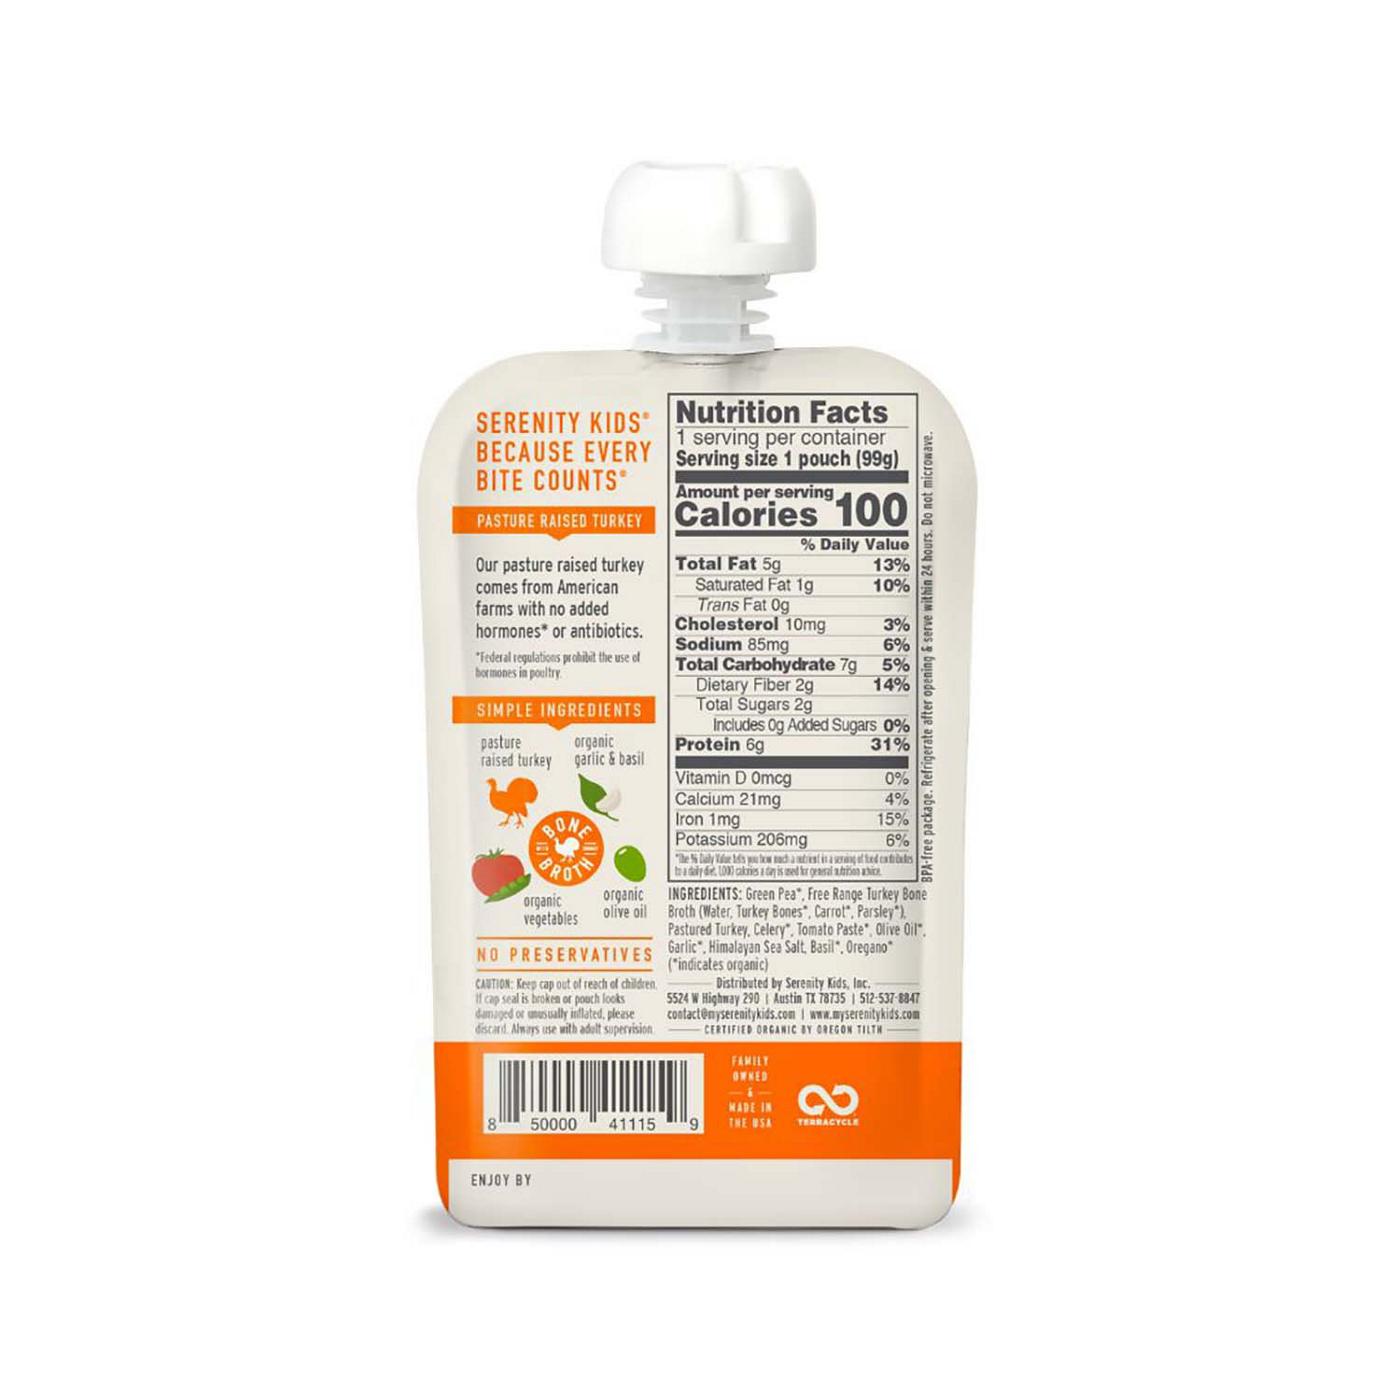 Serenity Kids Turkey Bolognese with Bone Broth Baby Food Pouch; image 3 of 4